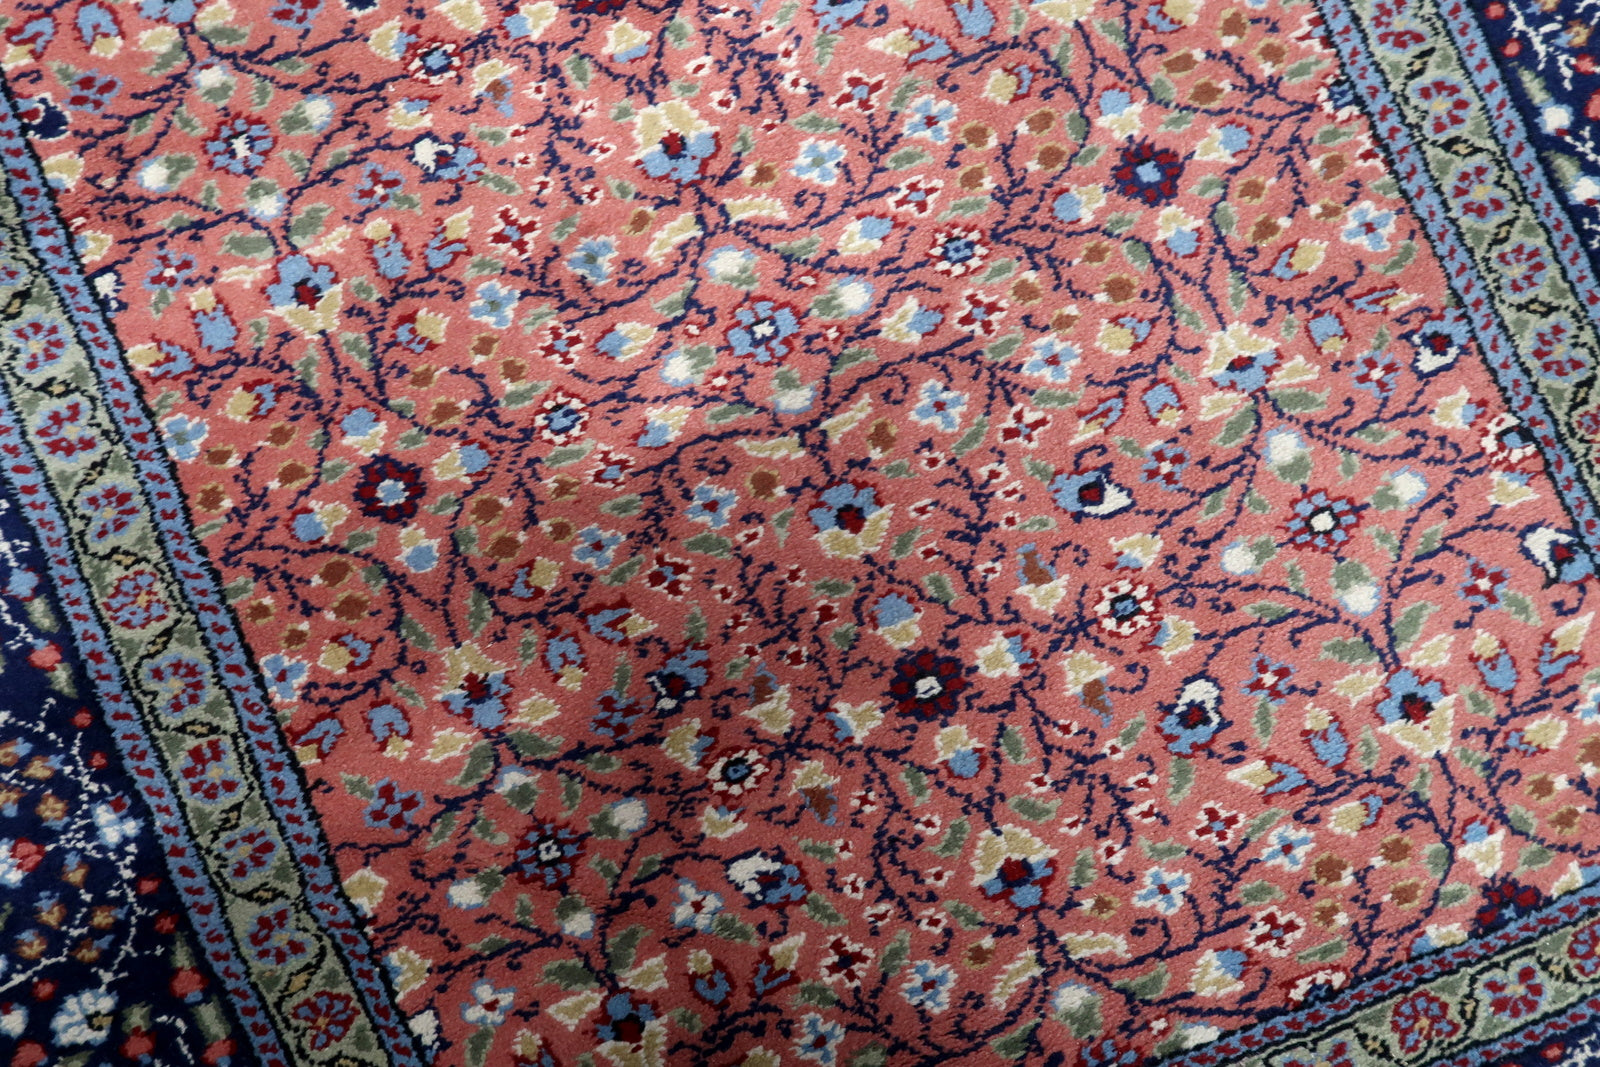 Intricate Patterns Revealed: Indian Agra Rug